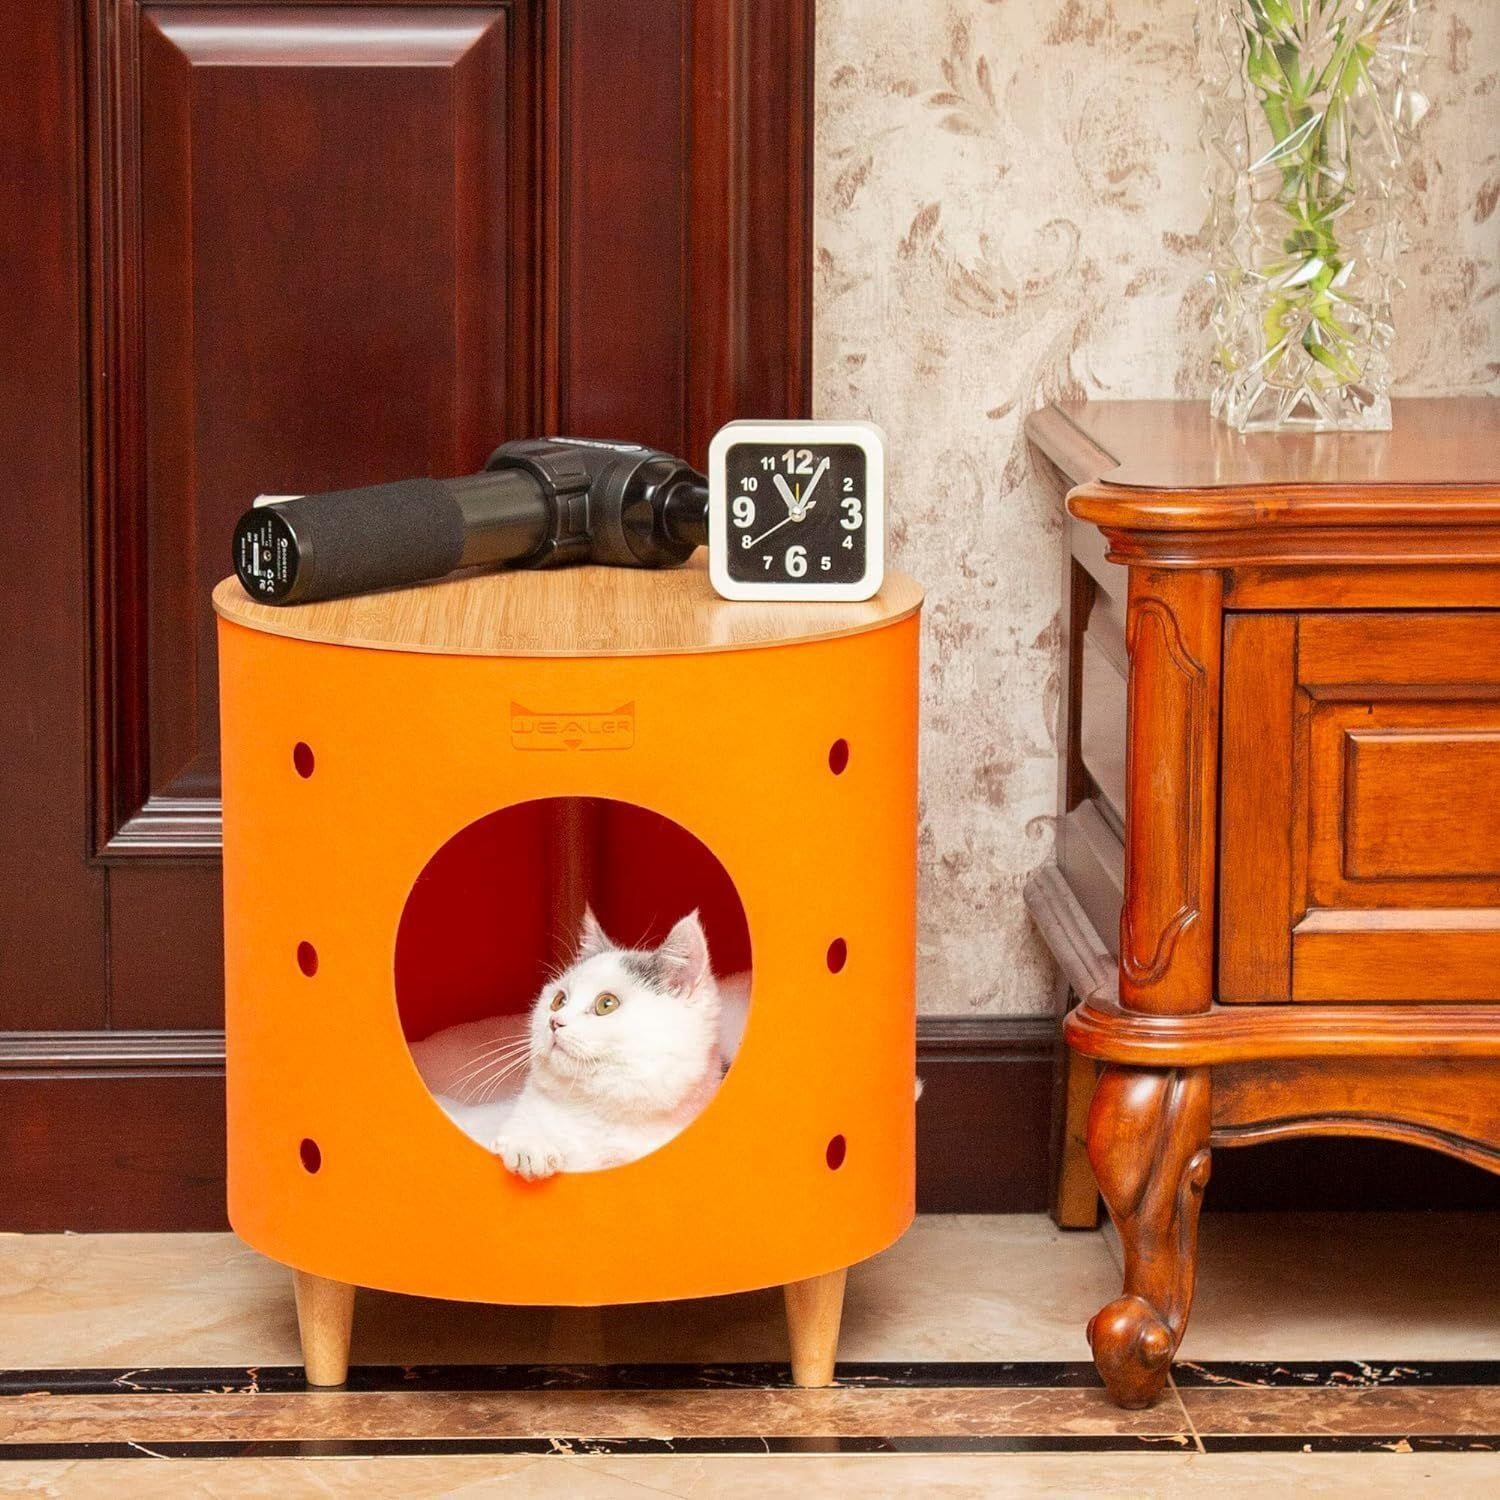 End Table with Small Cat House